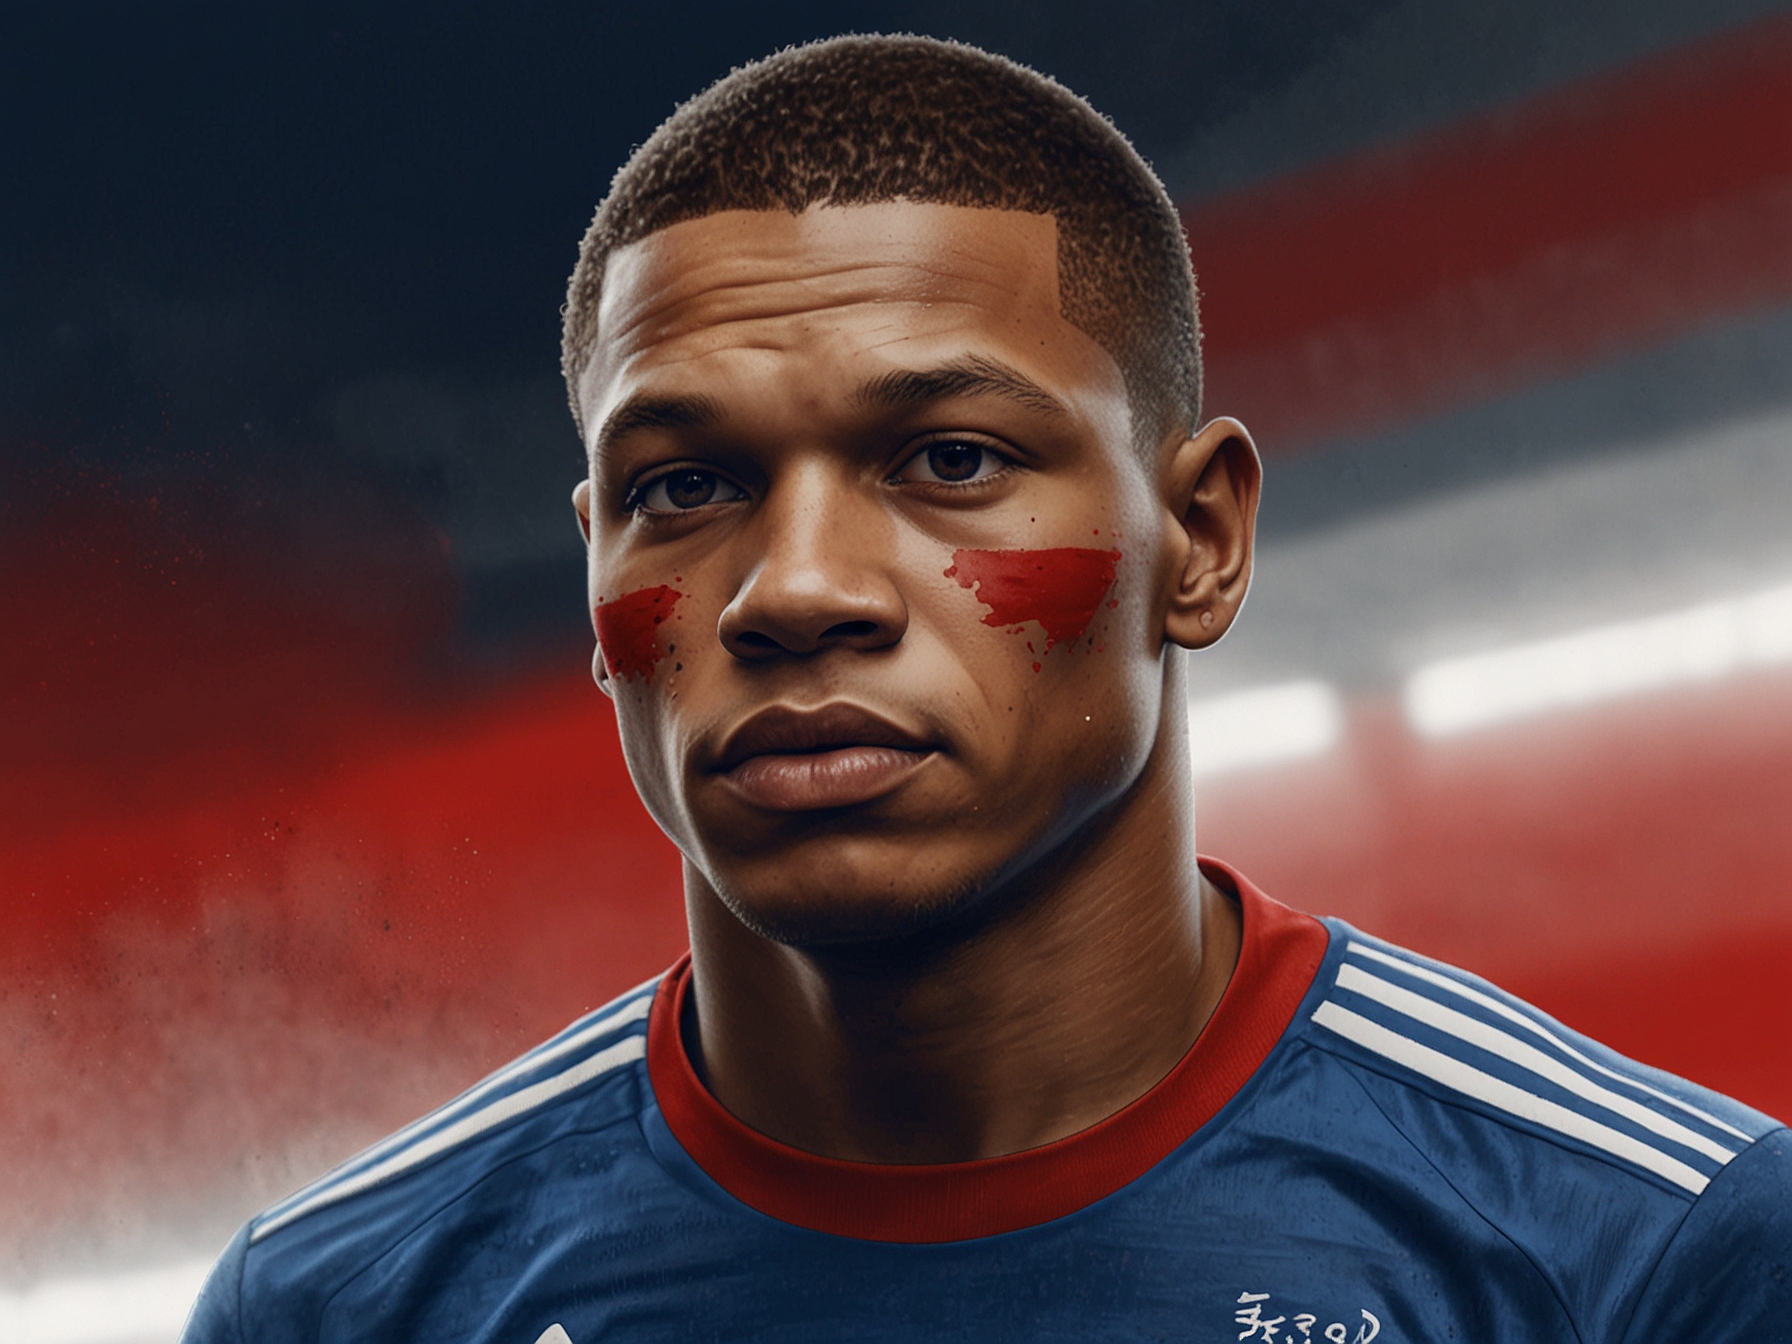 Kylian Mbappé trains intensely on the pitch in Leipzig, donning a striking blue, white, and red mask that represents the French flag, signaling his national pride and resilience.